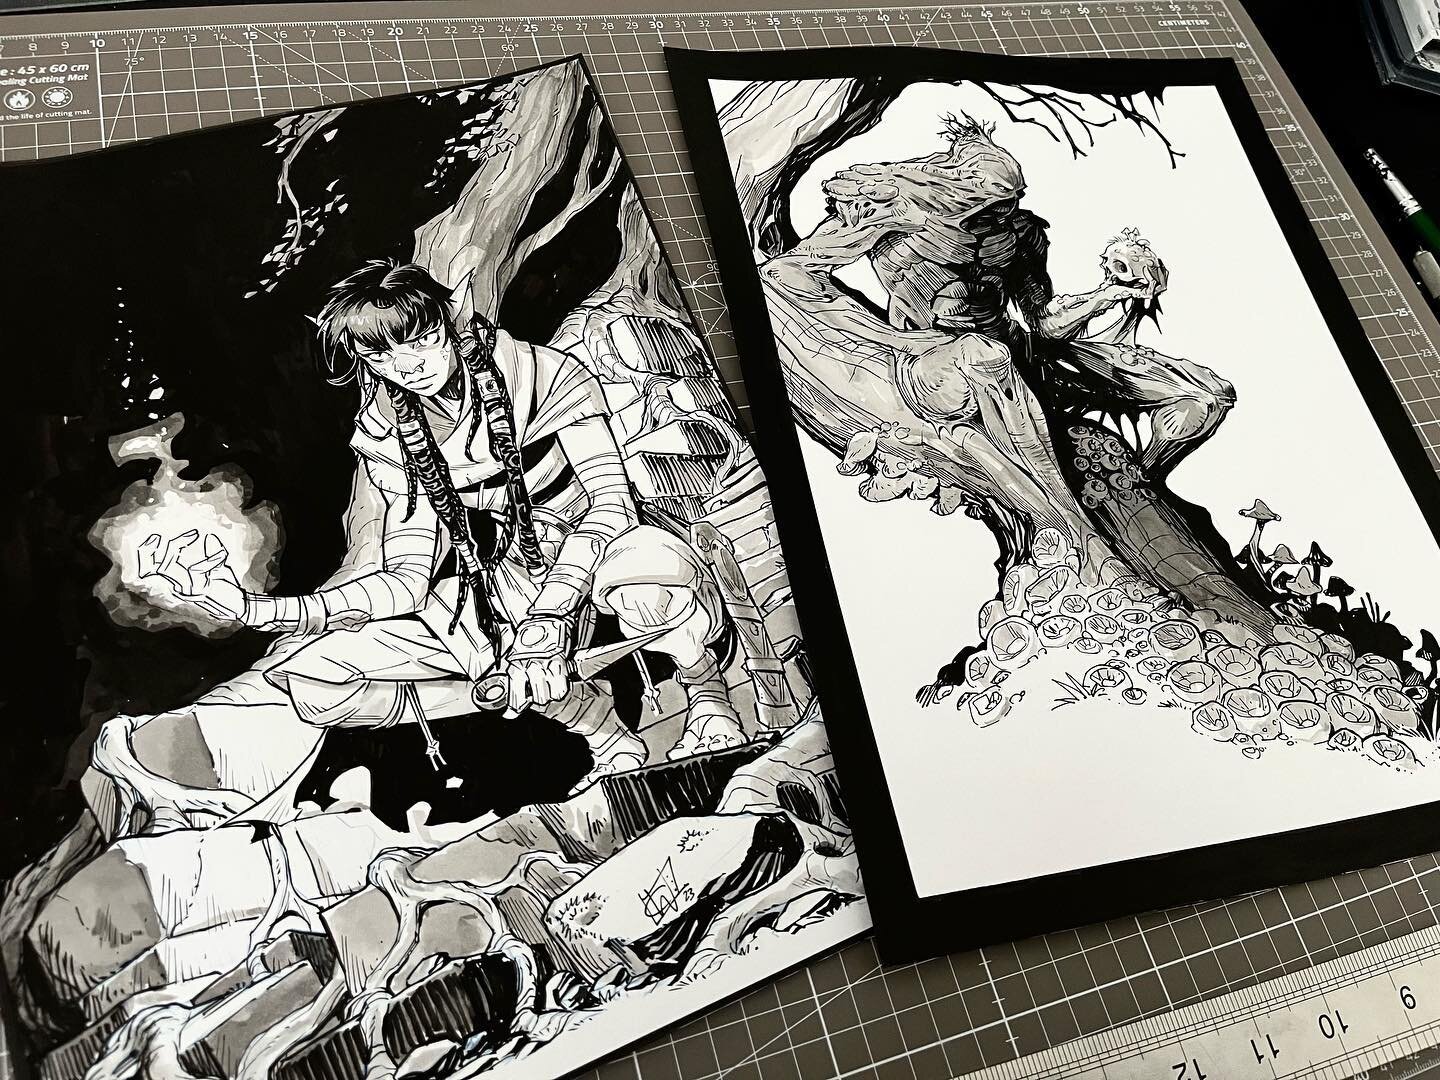 Phew! My set of commissions for New York Comic Con just got shipped out to @gmasorders to be picked up this weekend. 
Big thanks to all that put in an order. This was a really fun bunch to do. Choices that were right up my street. Especially my very 